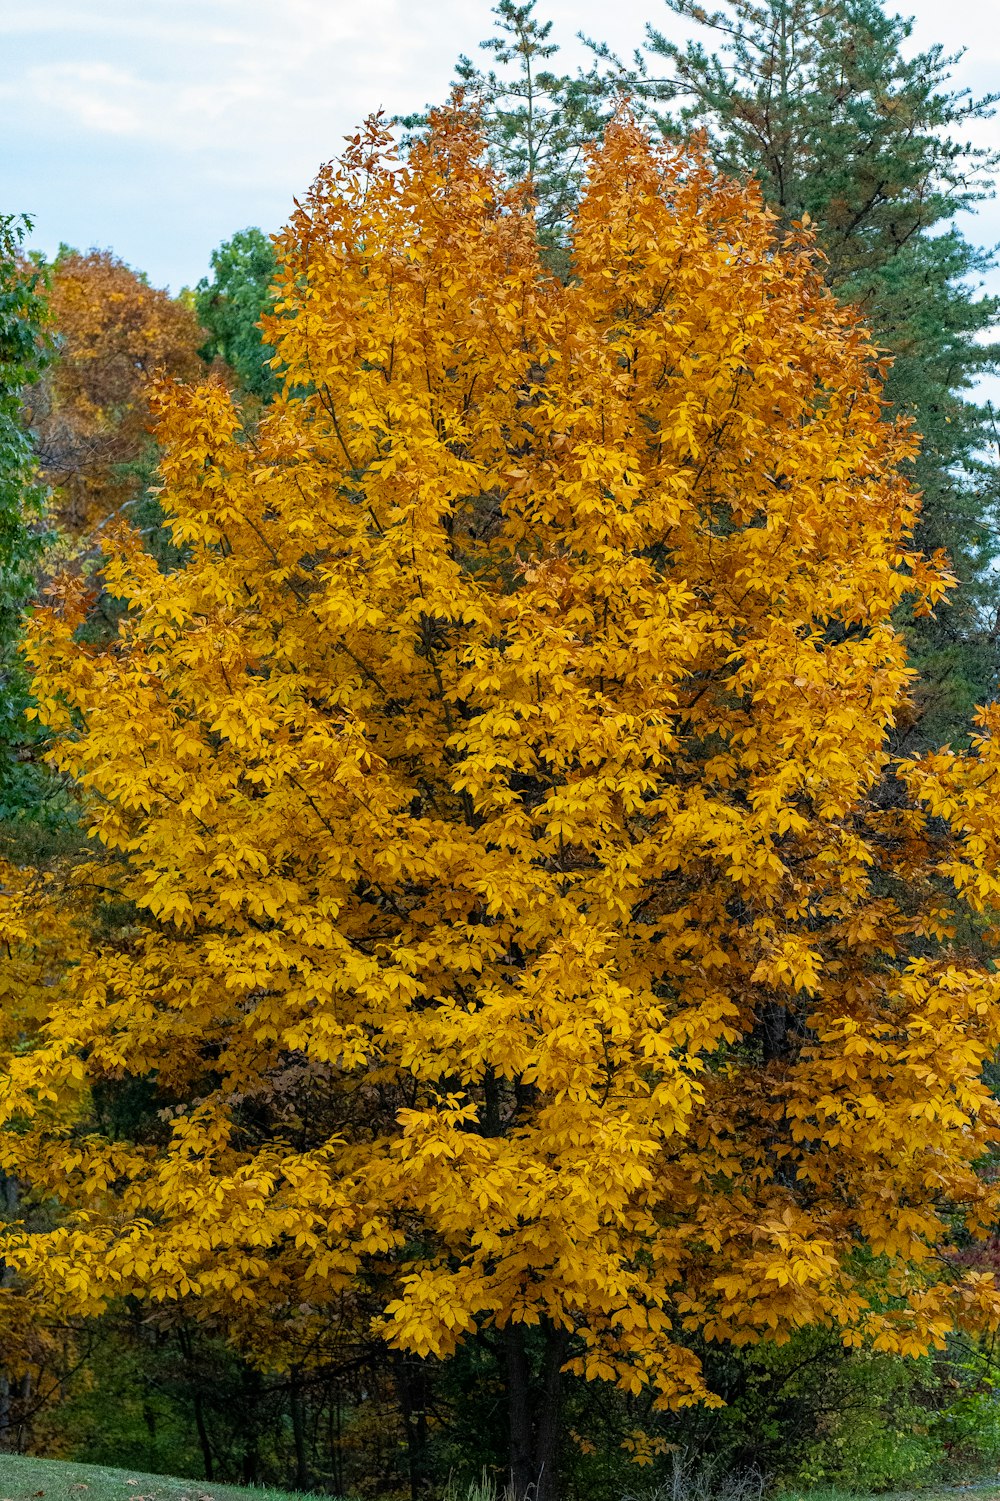 a large yellow tree in the middle of a forest